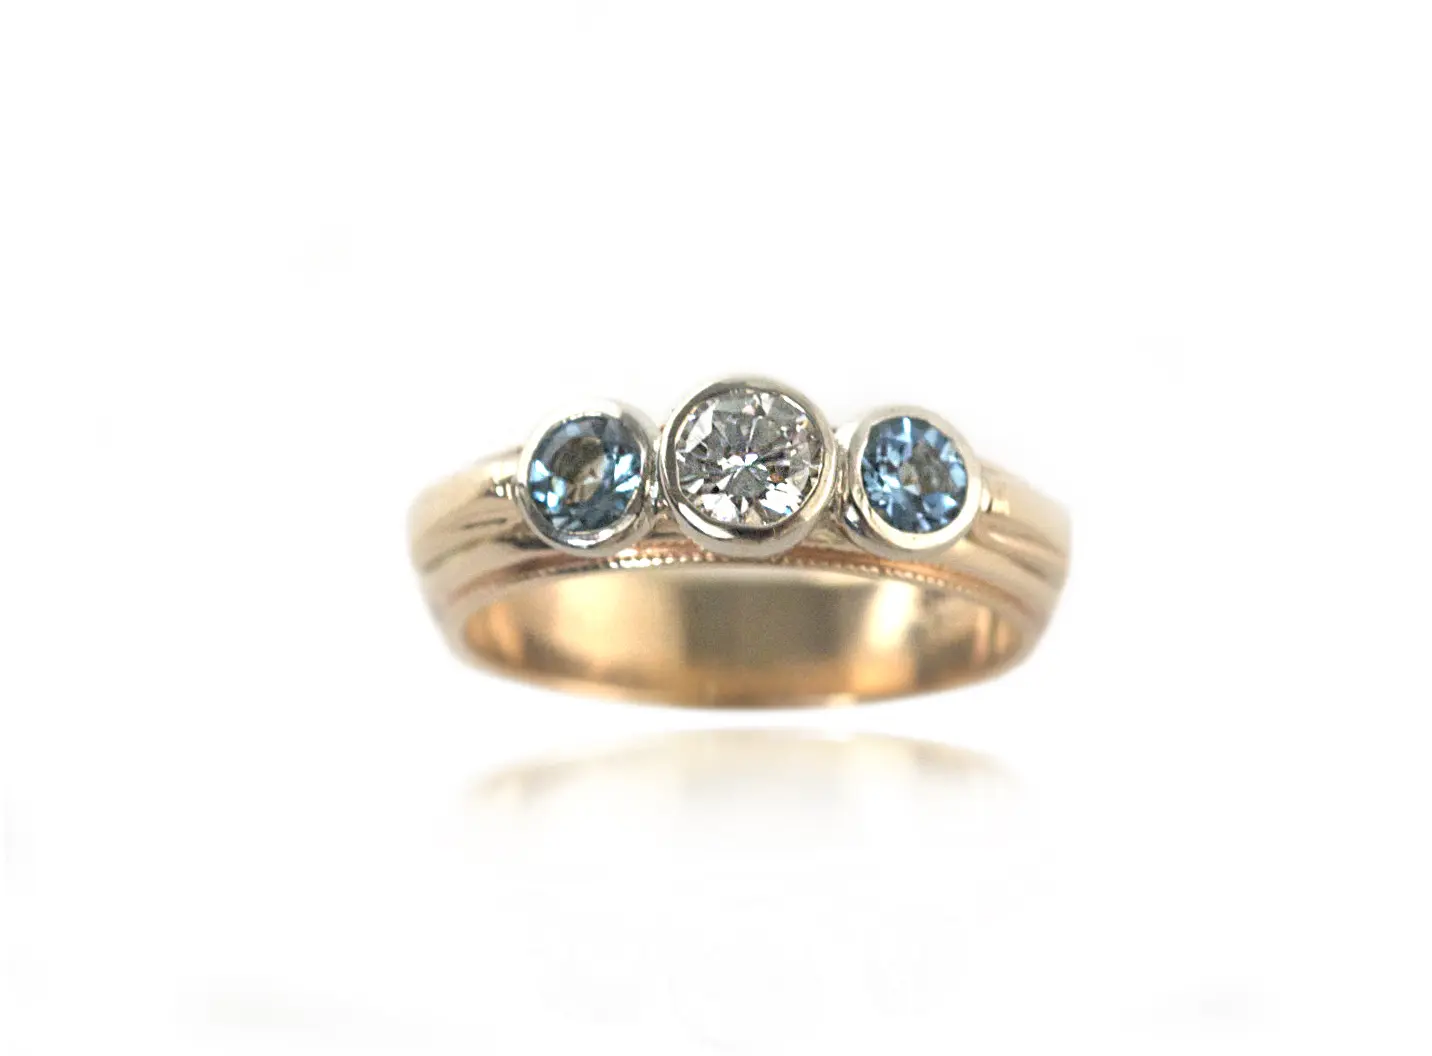 A gold ring with three stones on it